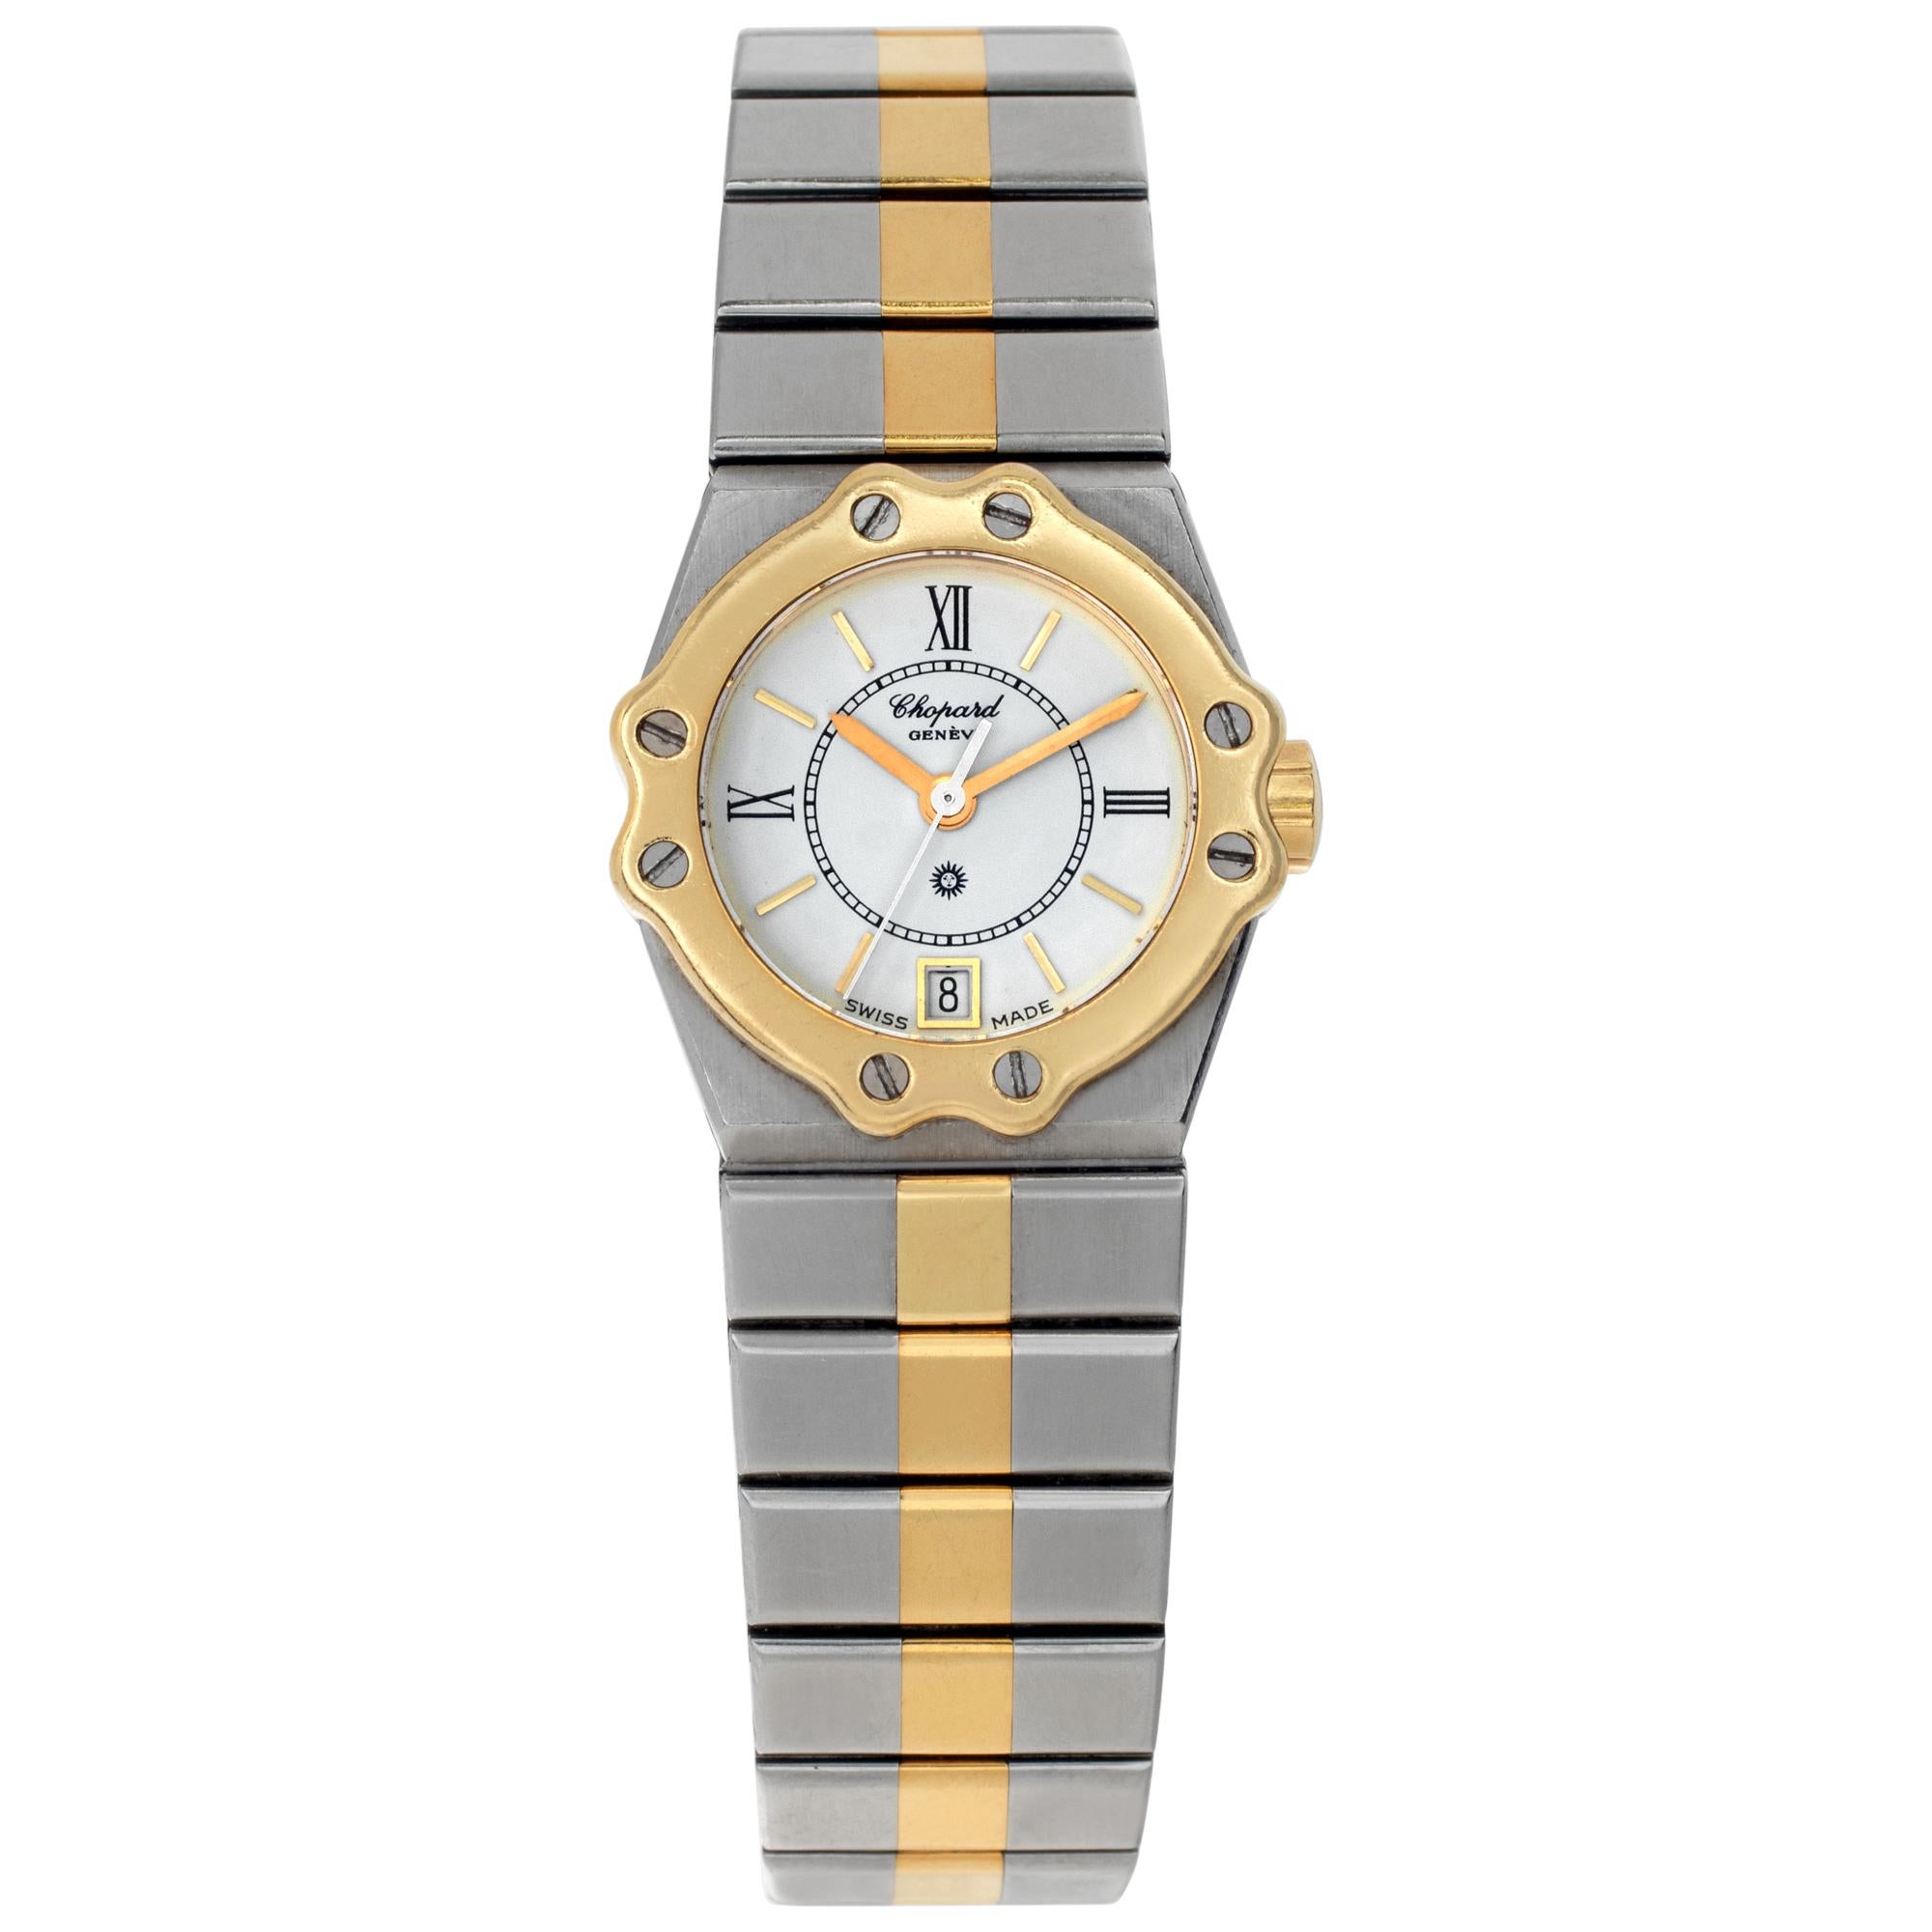 Chopard St. Moritz 8024 in Stainless Steel with a White dial 23mm Quartz watch For Sale